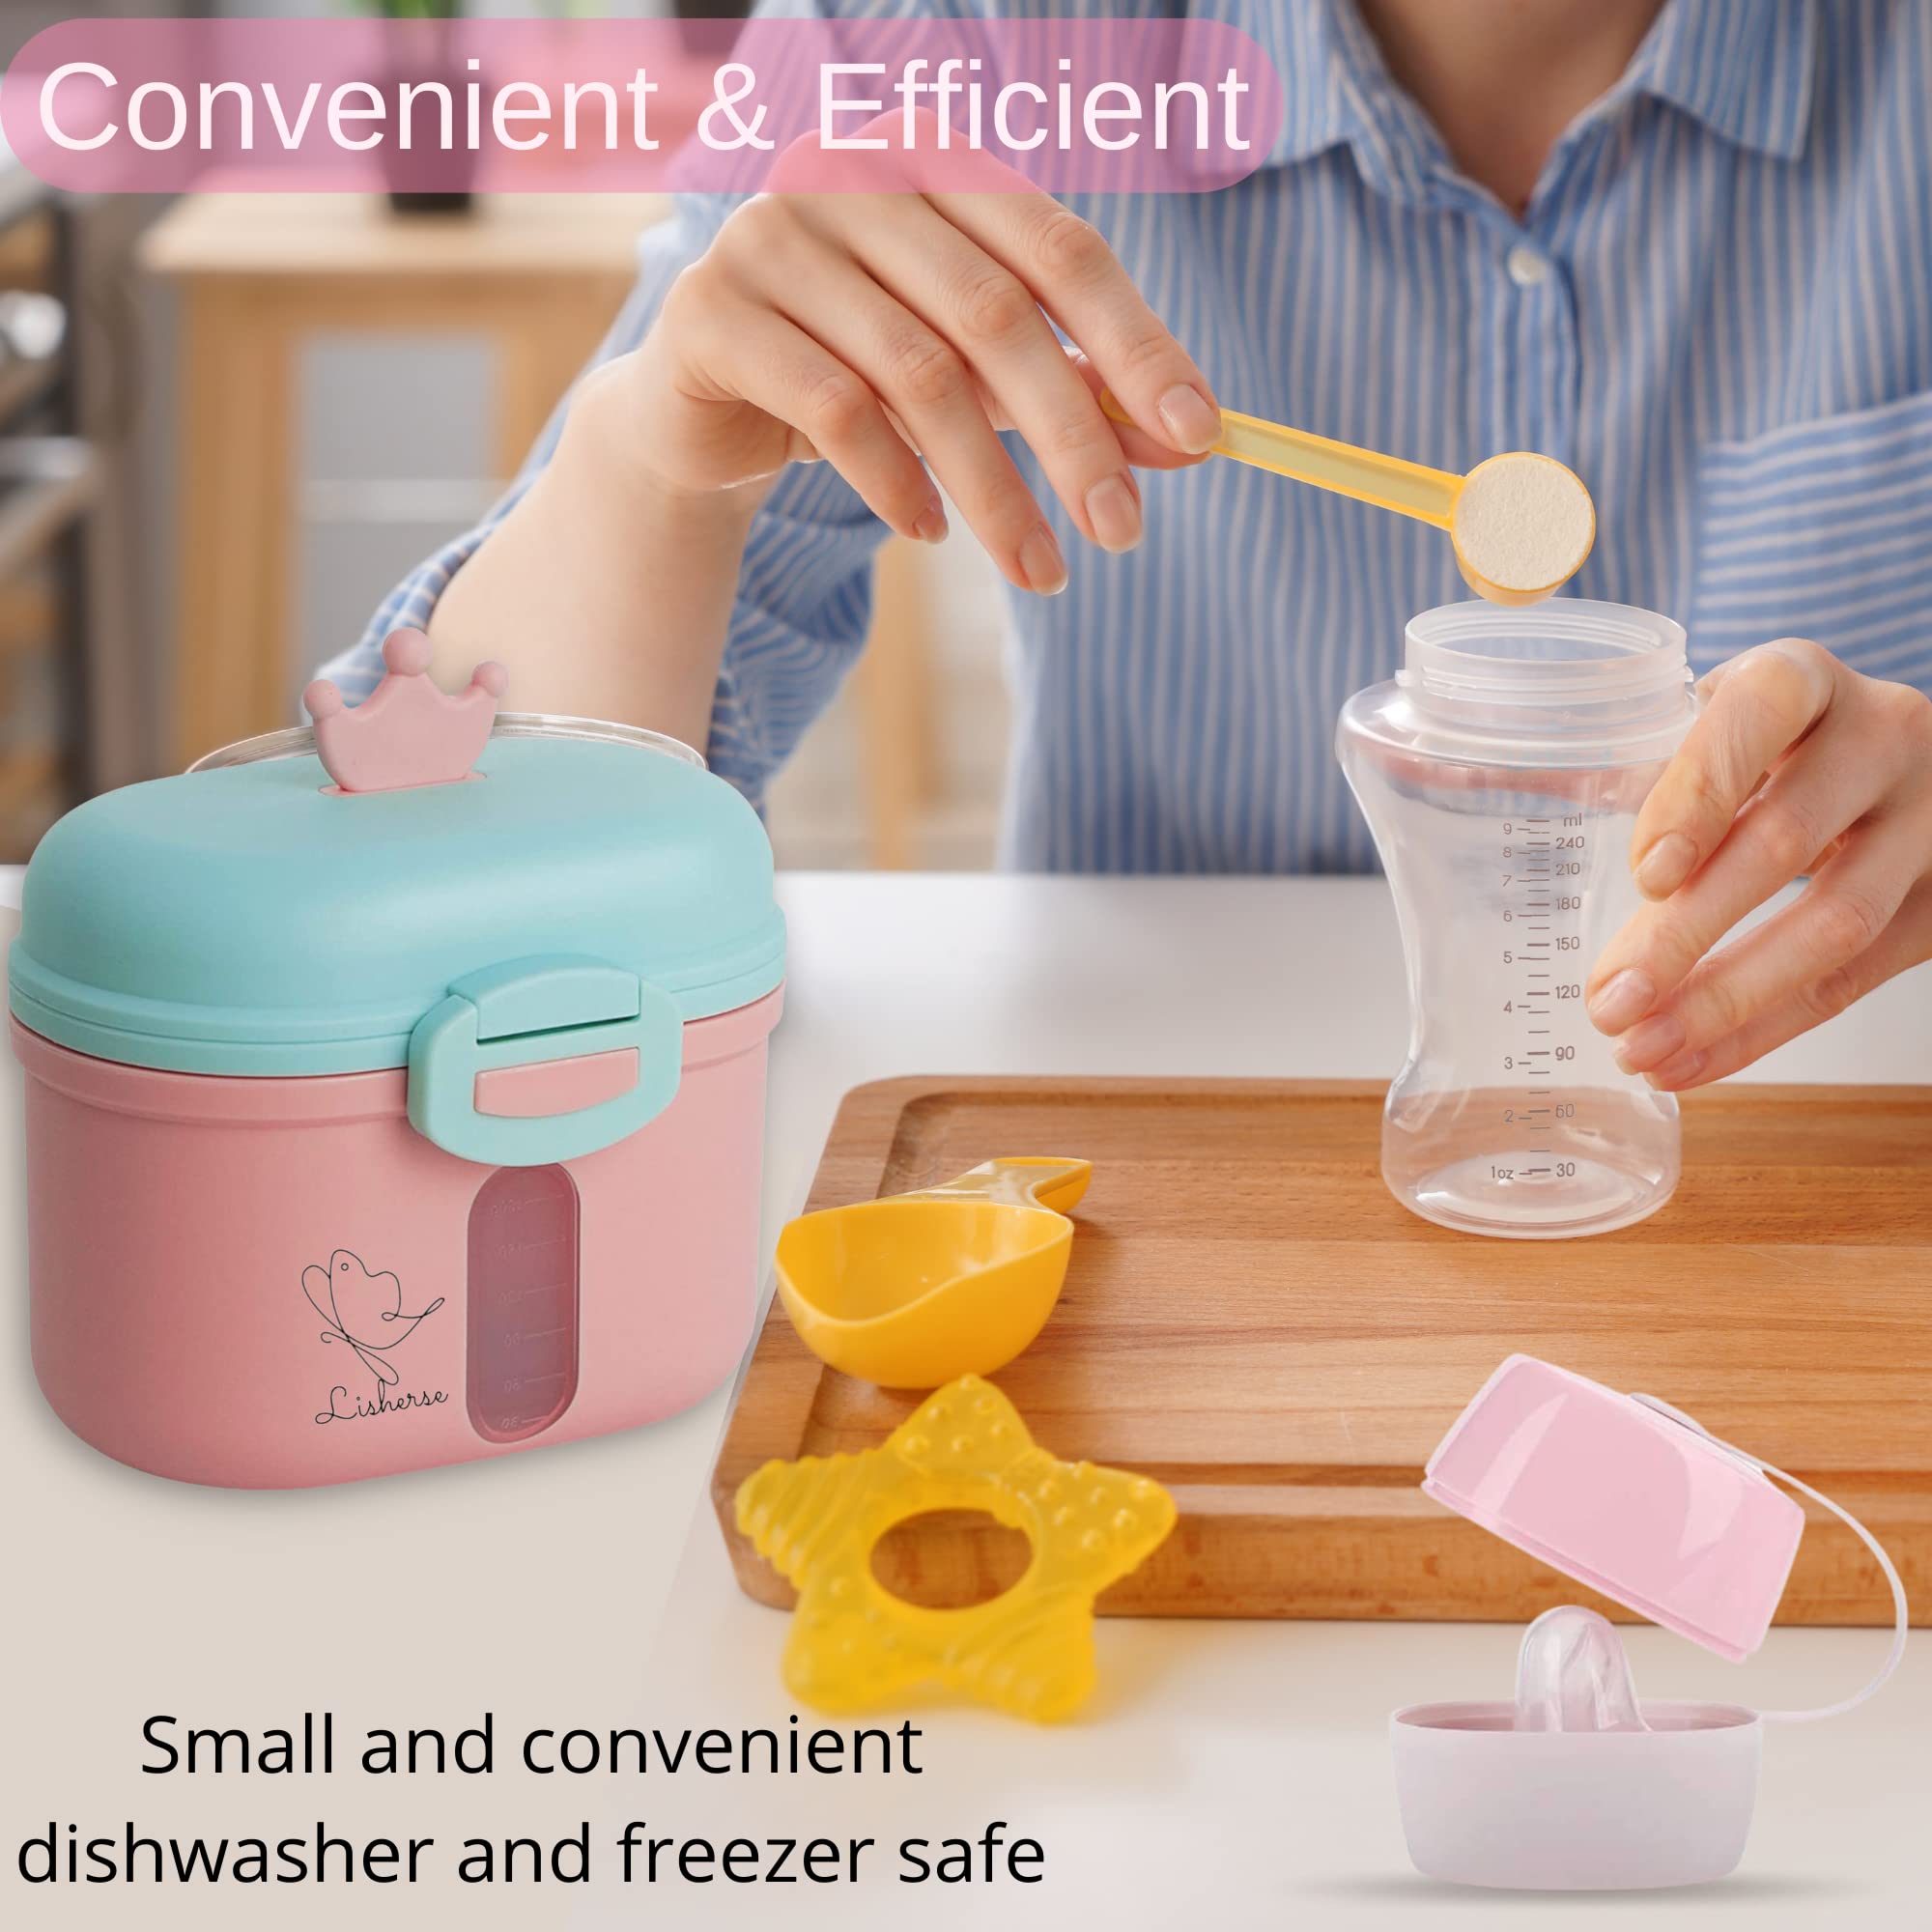 Baby Formula Container, Baby Formula Dispenser, Formula Container, Formula Dispenser on The go, Baby Formula Container for Travel, 8.46Z, 0.52LB, 240g, Includes a Multi-use Container, Pink